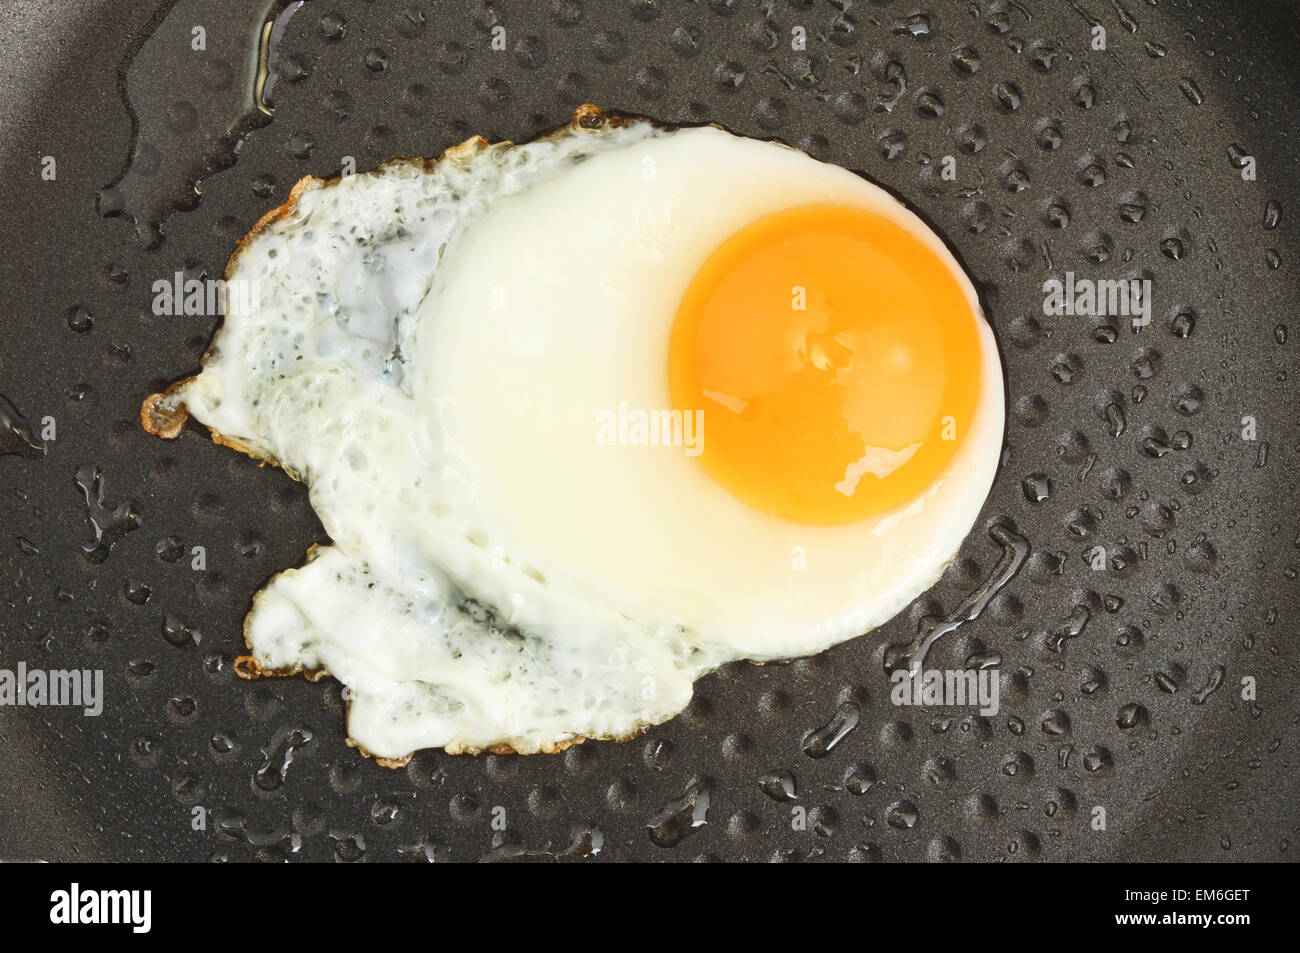 Fried egg in a non stick frying pan Stock Photo